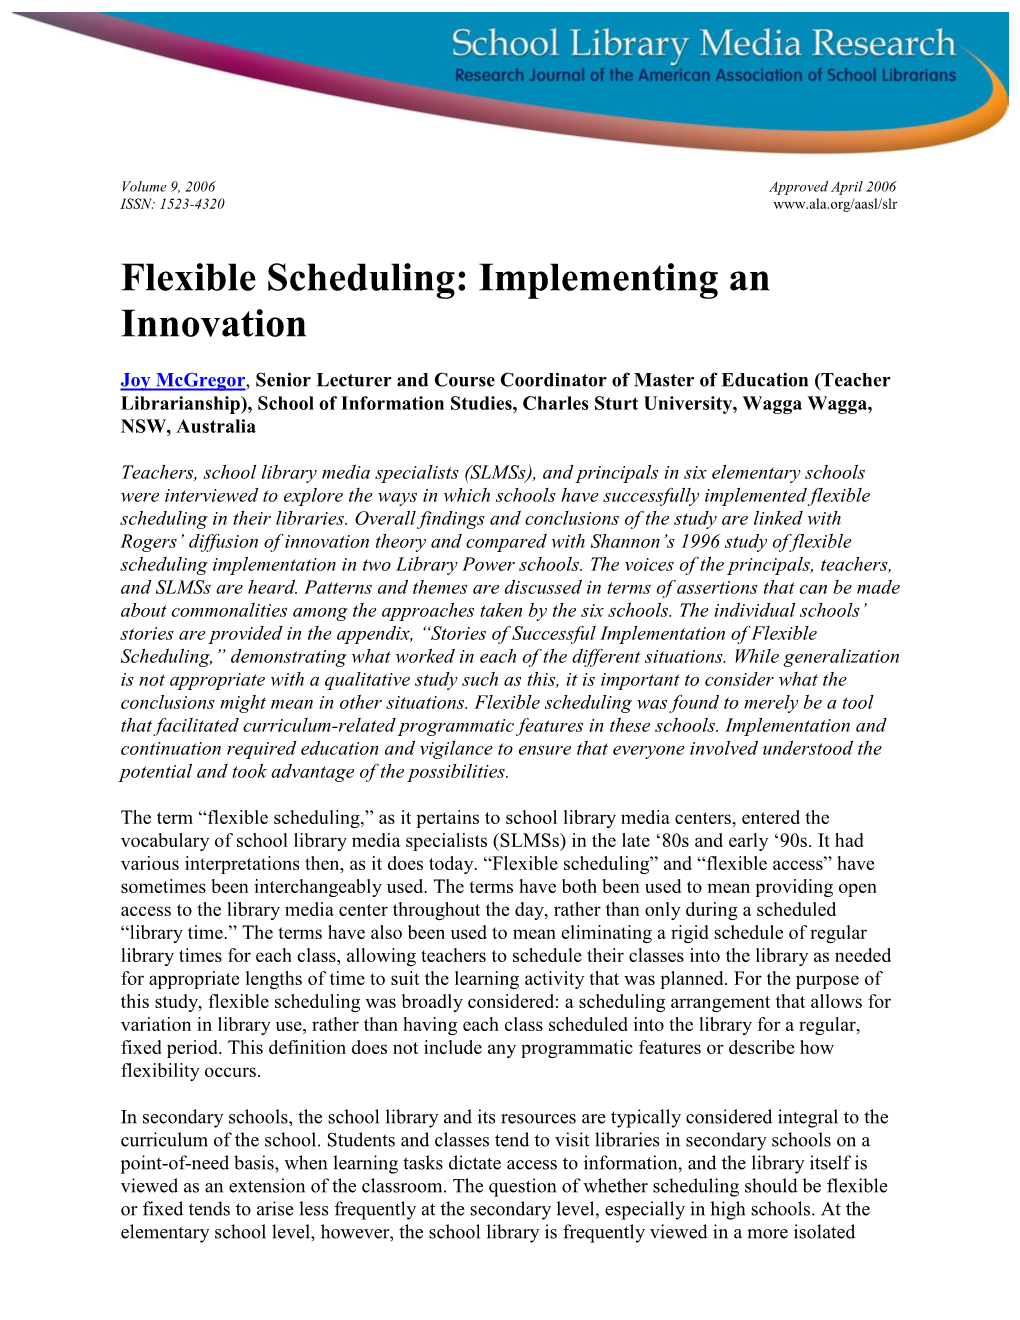 Flexible Scheduling: Implementing an Innovation